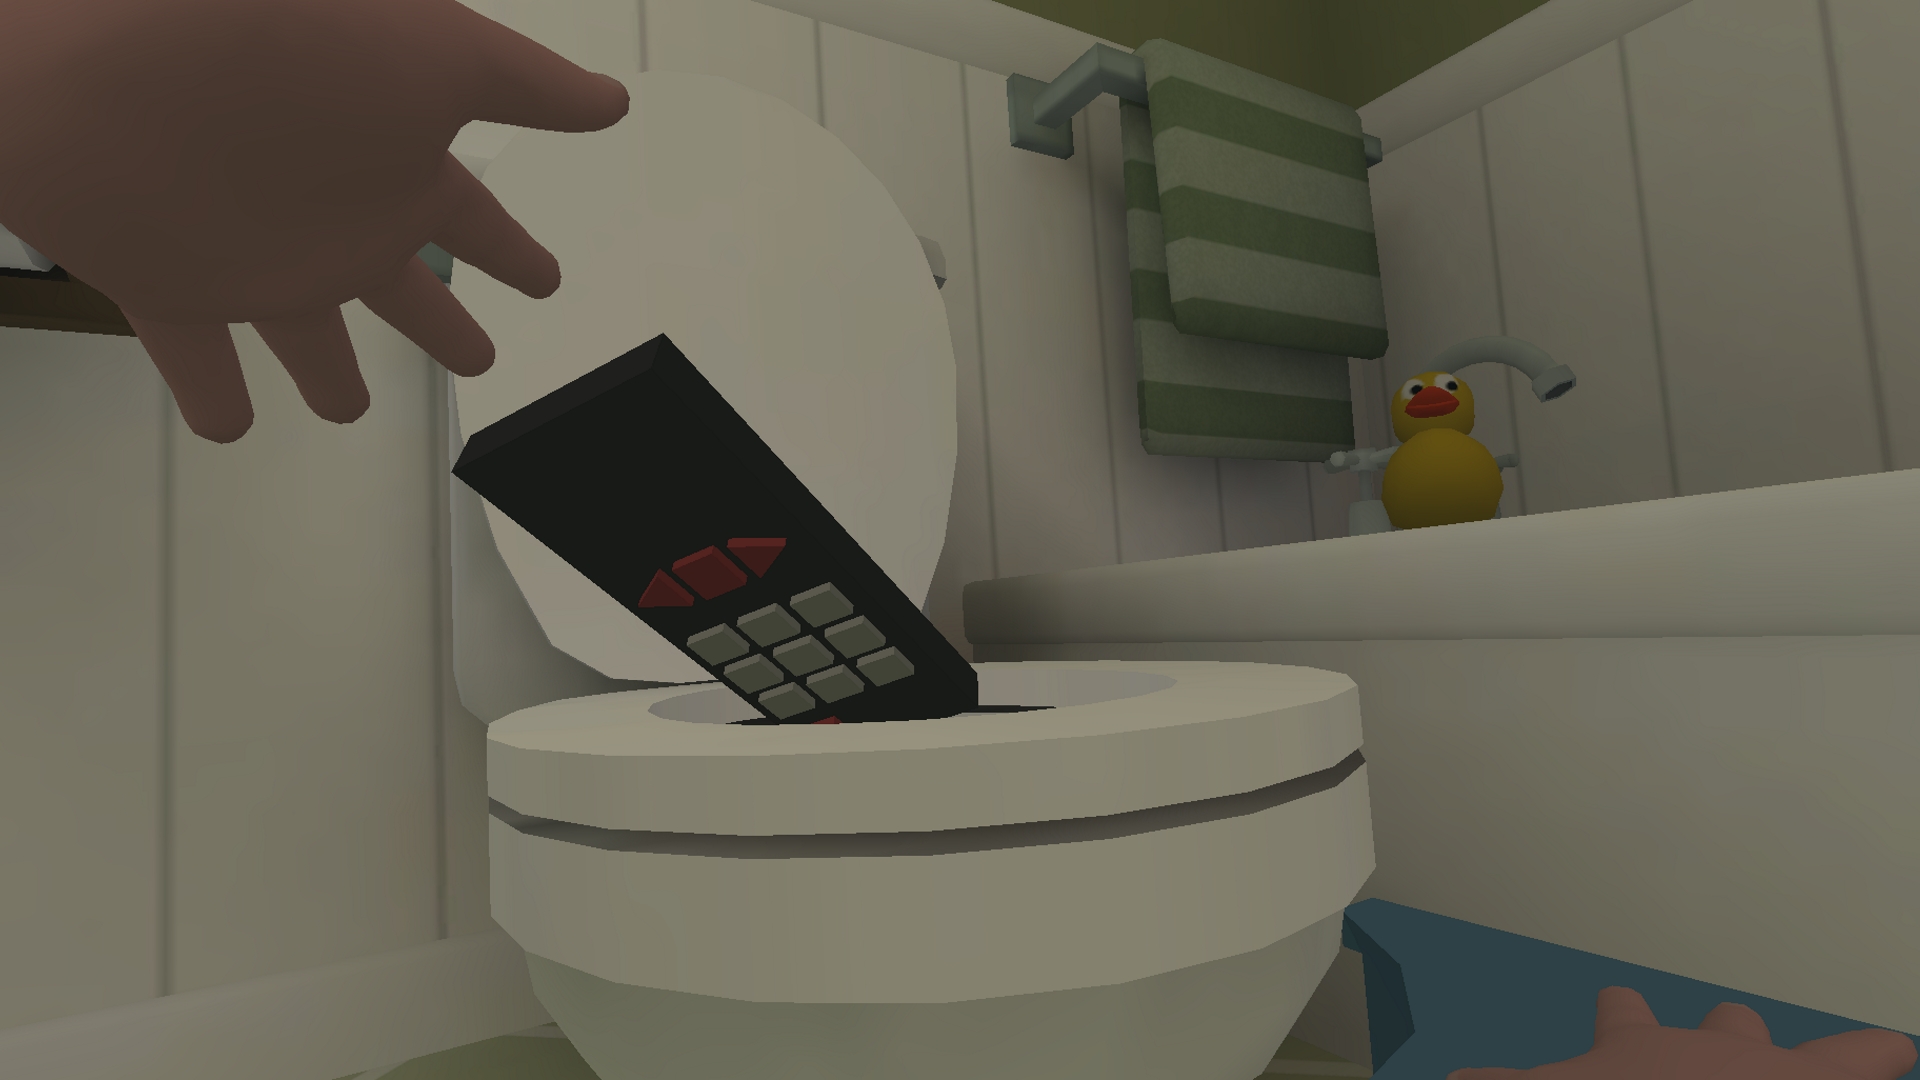 player throwing remote control in the toilet bowl in baby hands vr